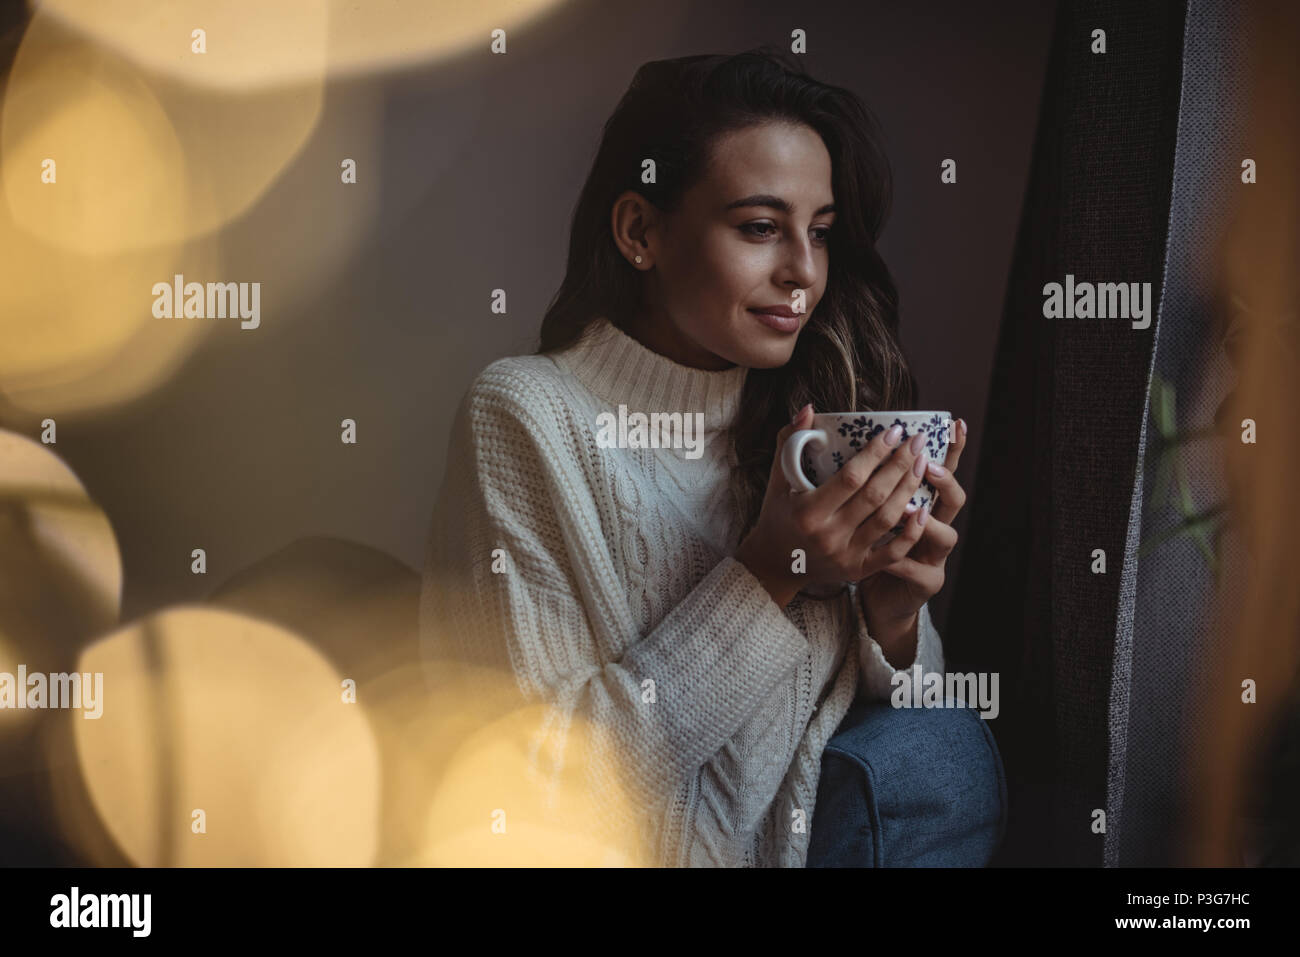 Beautiful woman holding a coffee cup Stock Photo